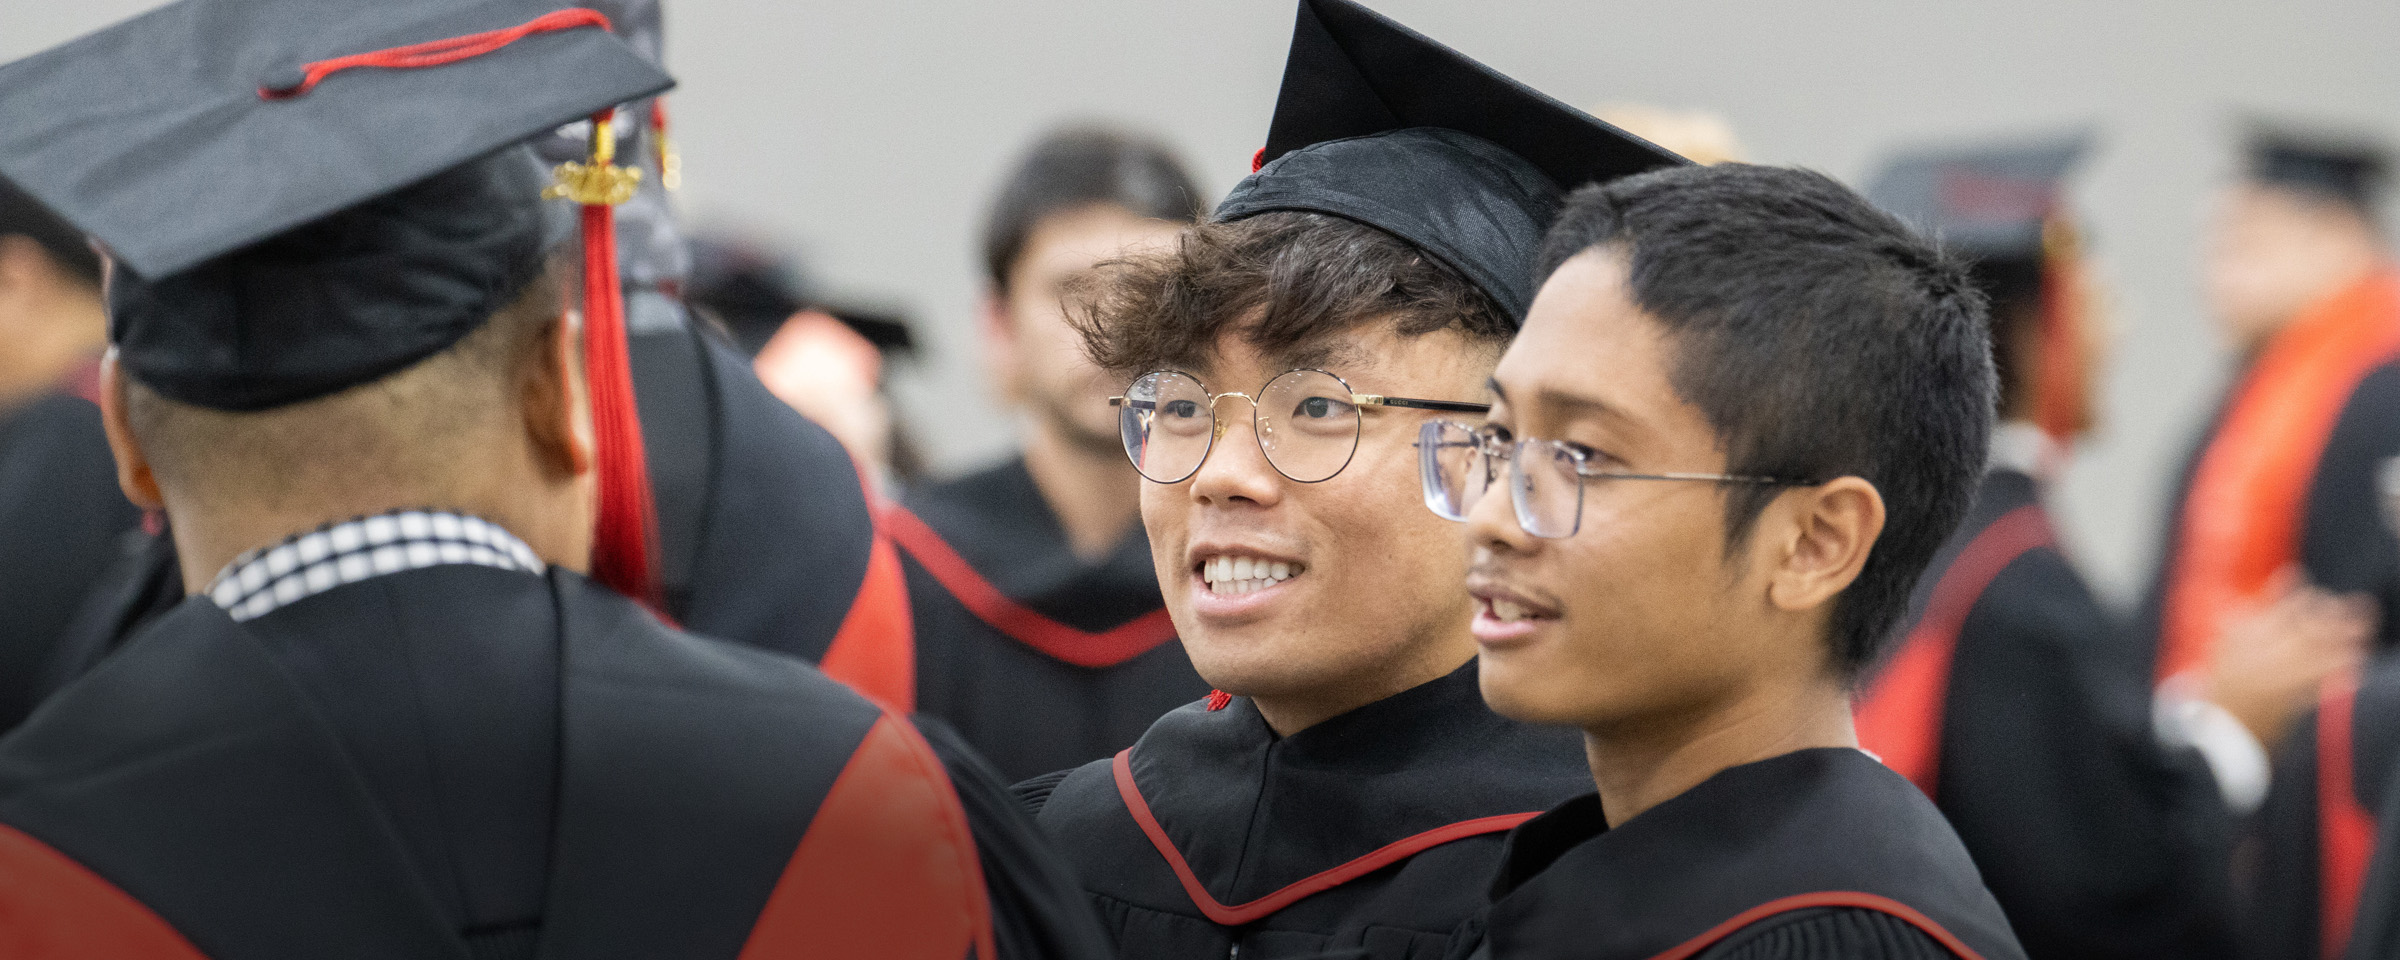 Two men with glasses, wearing black grad robes and mortarboards, talk to a friend at RRC Polytech's convocation ceremony.